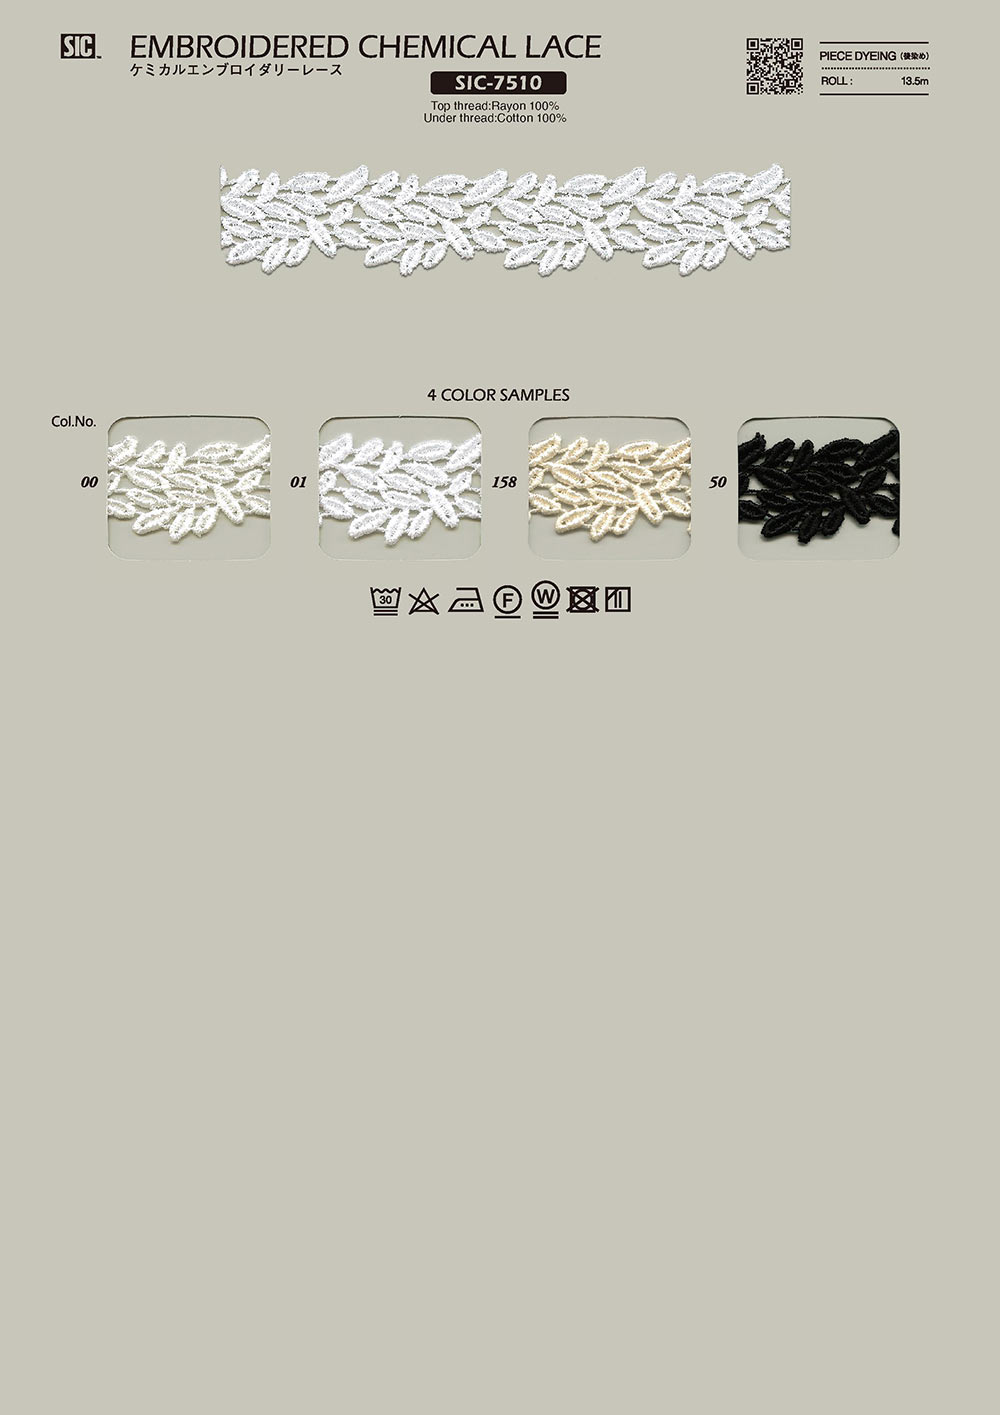 SIC-7510 Chemical Embroidery Lace/ 23mm SHINDO(SIC)